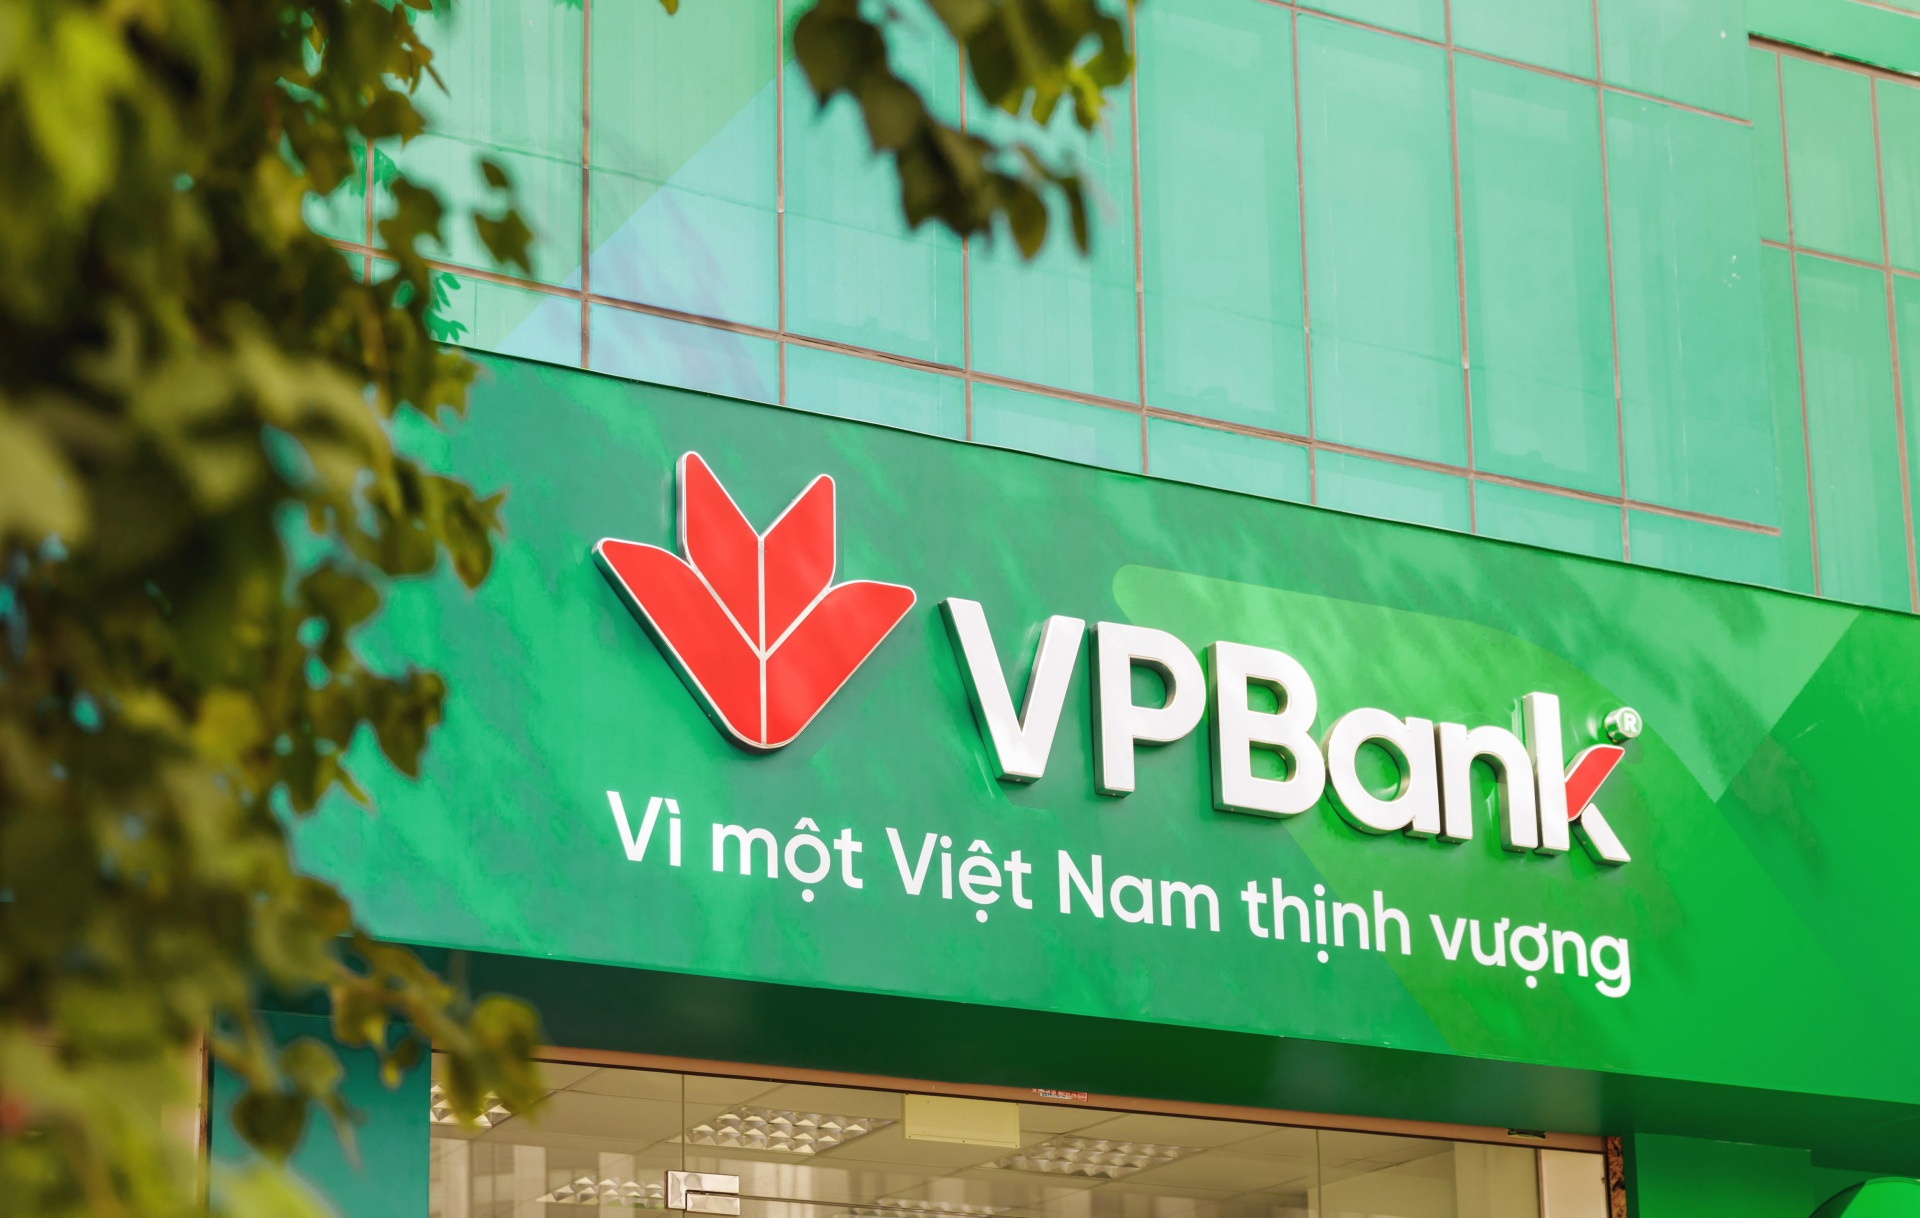 VPBank CEO addresses challenges and strategies for Vietnam's real estate sector